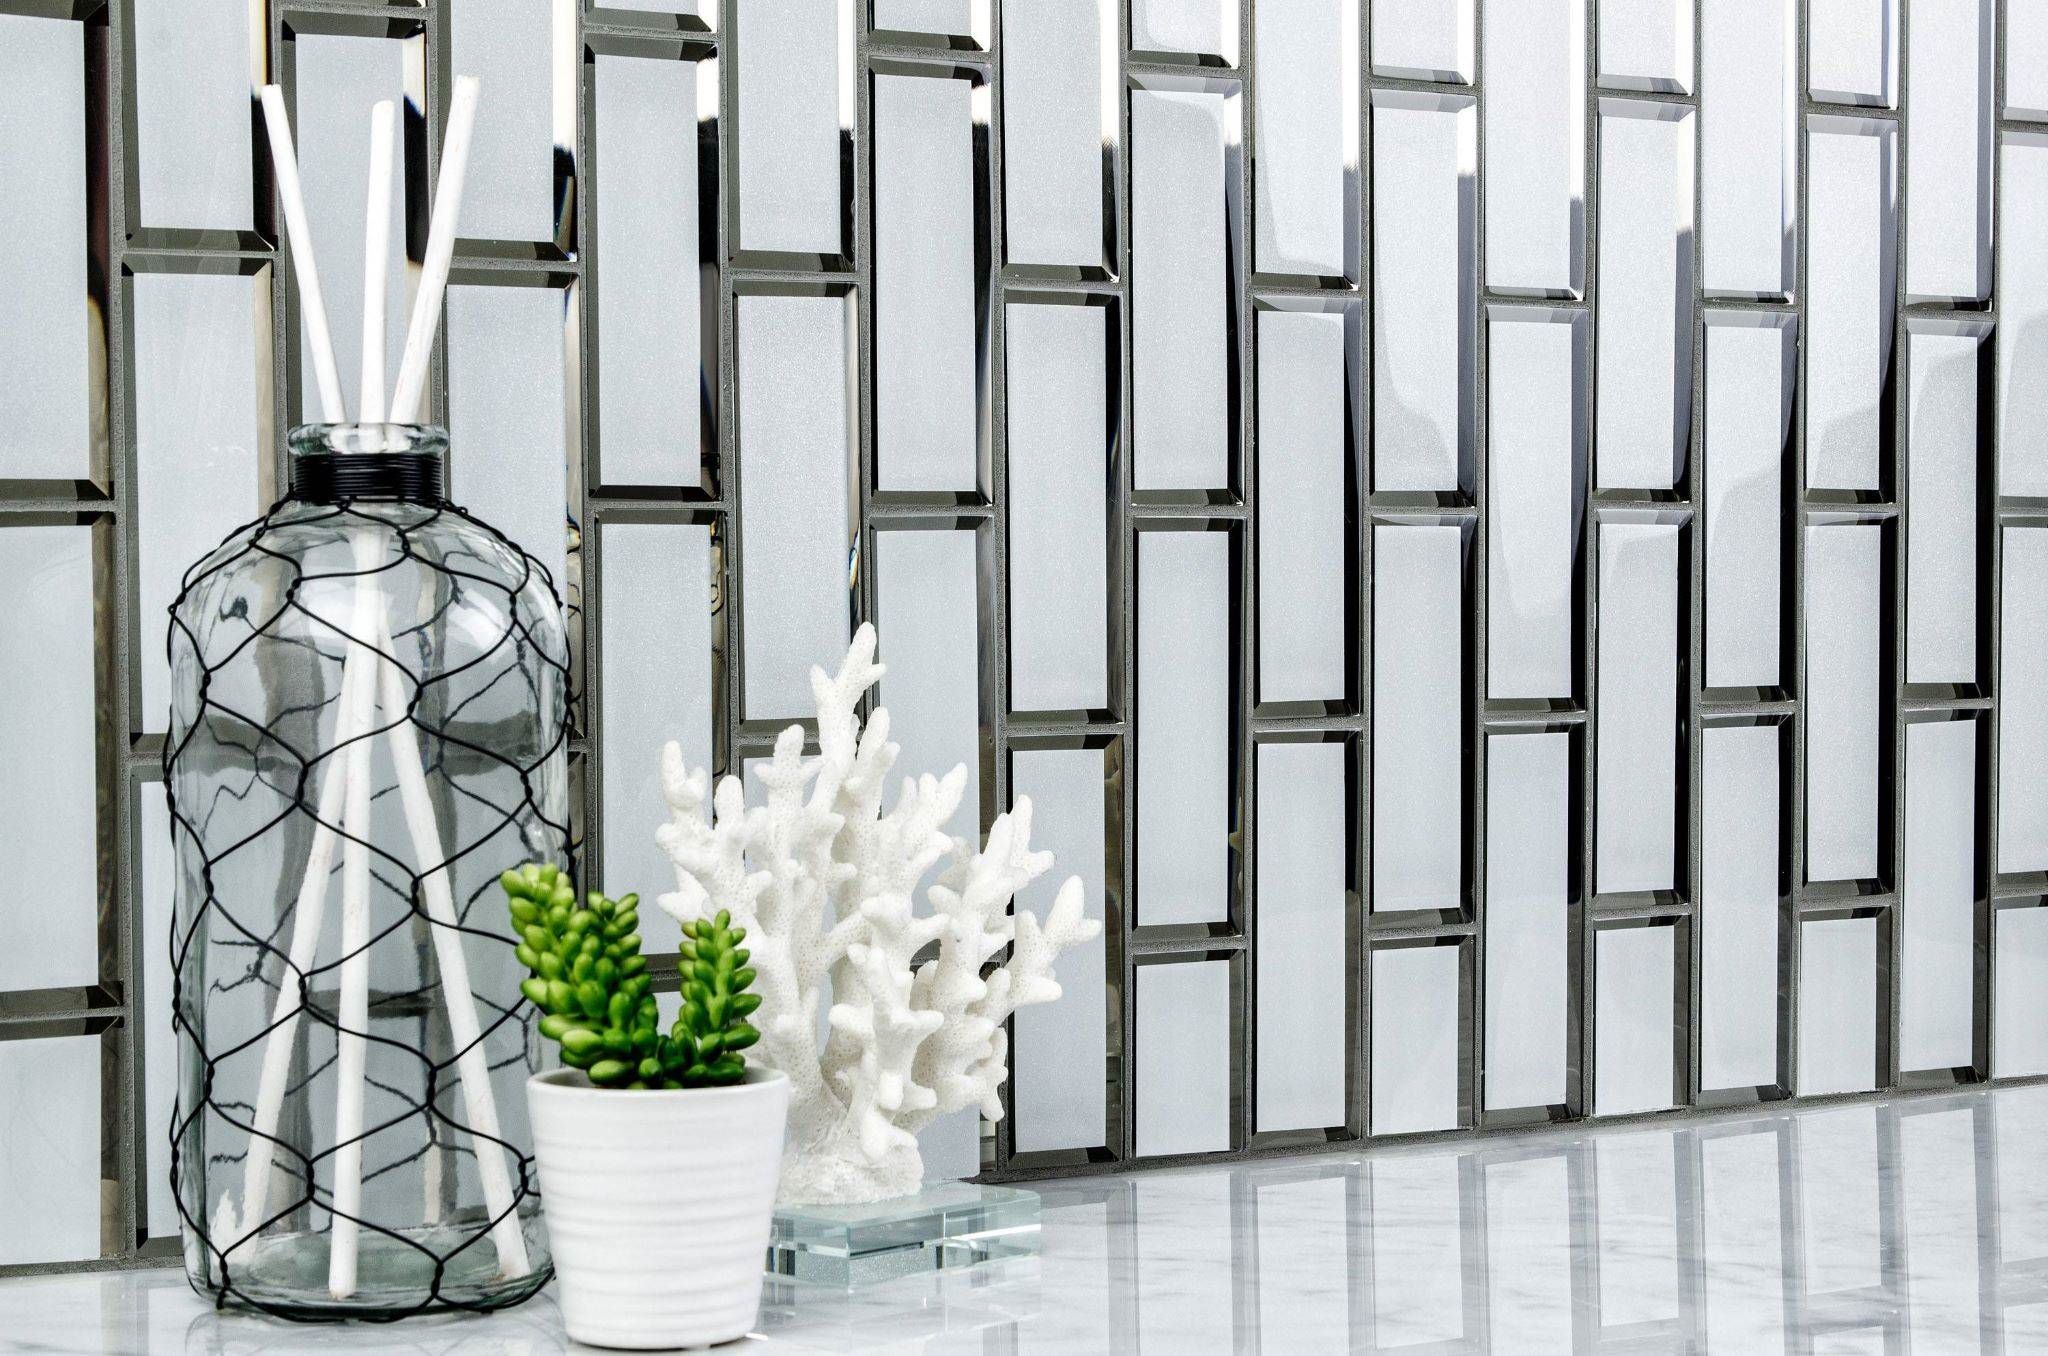 WA32Y | Stones & More | Finest selection of Mosaics, Glass, Tile and Stone